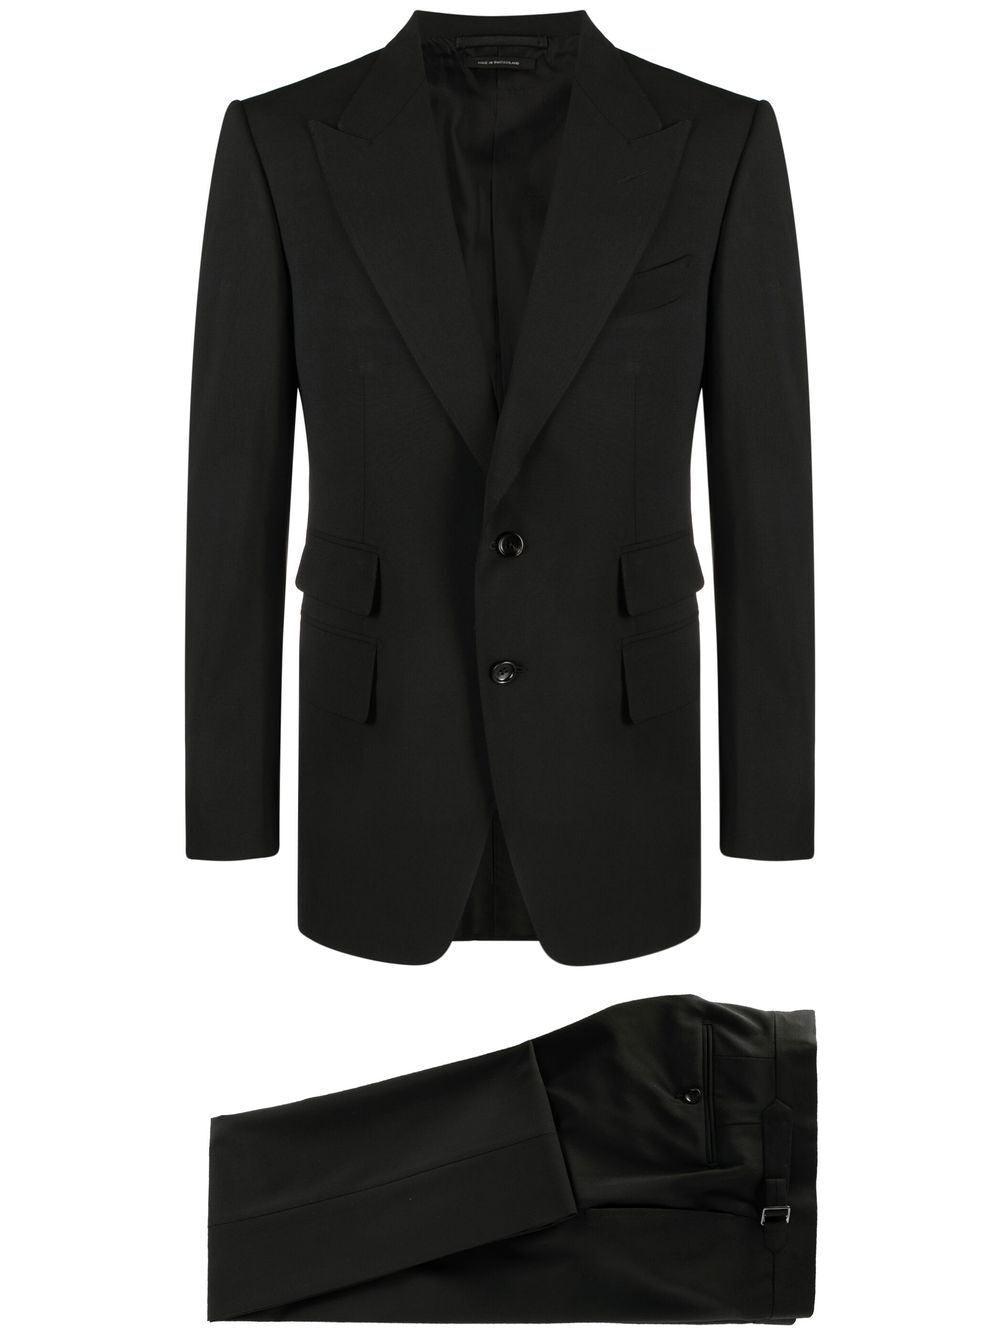 TOM FORD SINGLE BREASTED STRAIGHT LEG SUIT